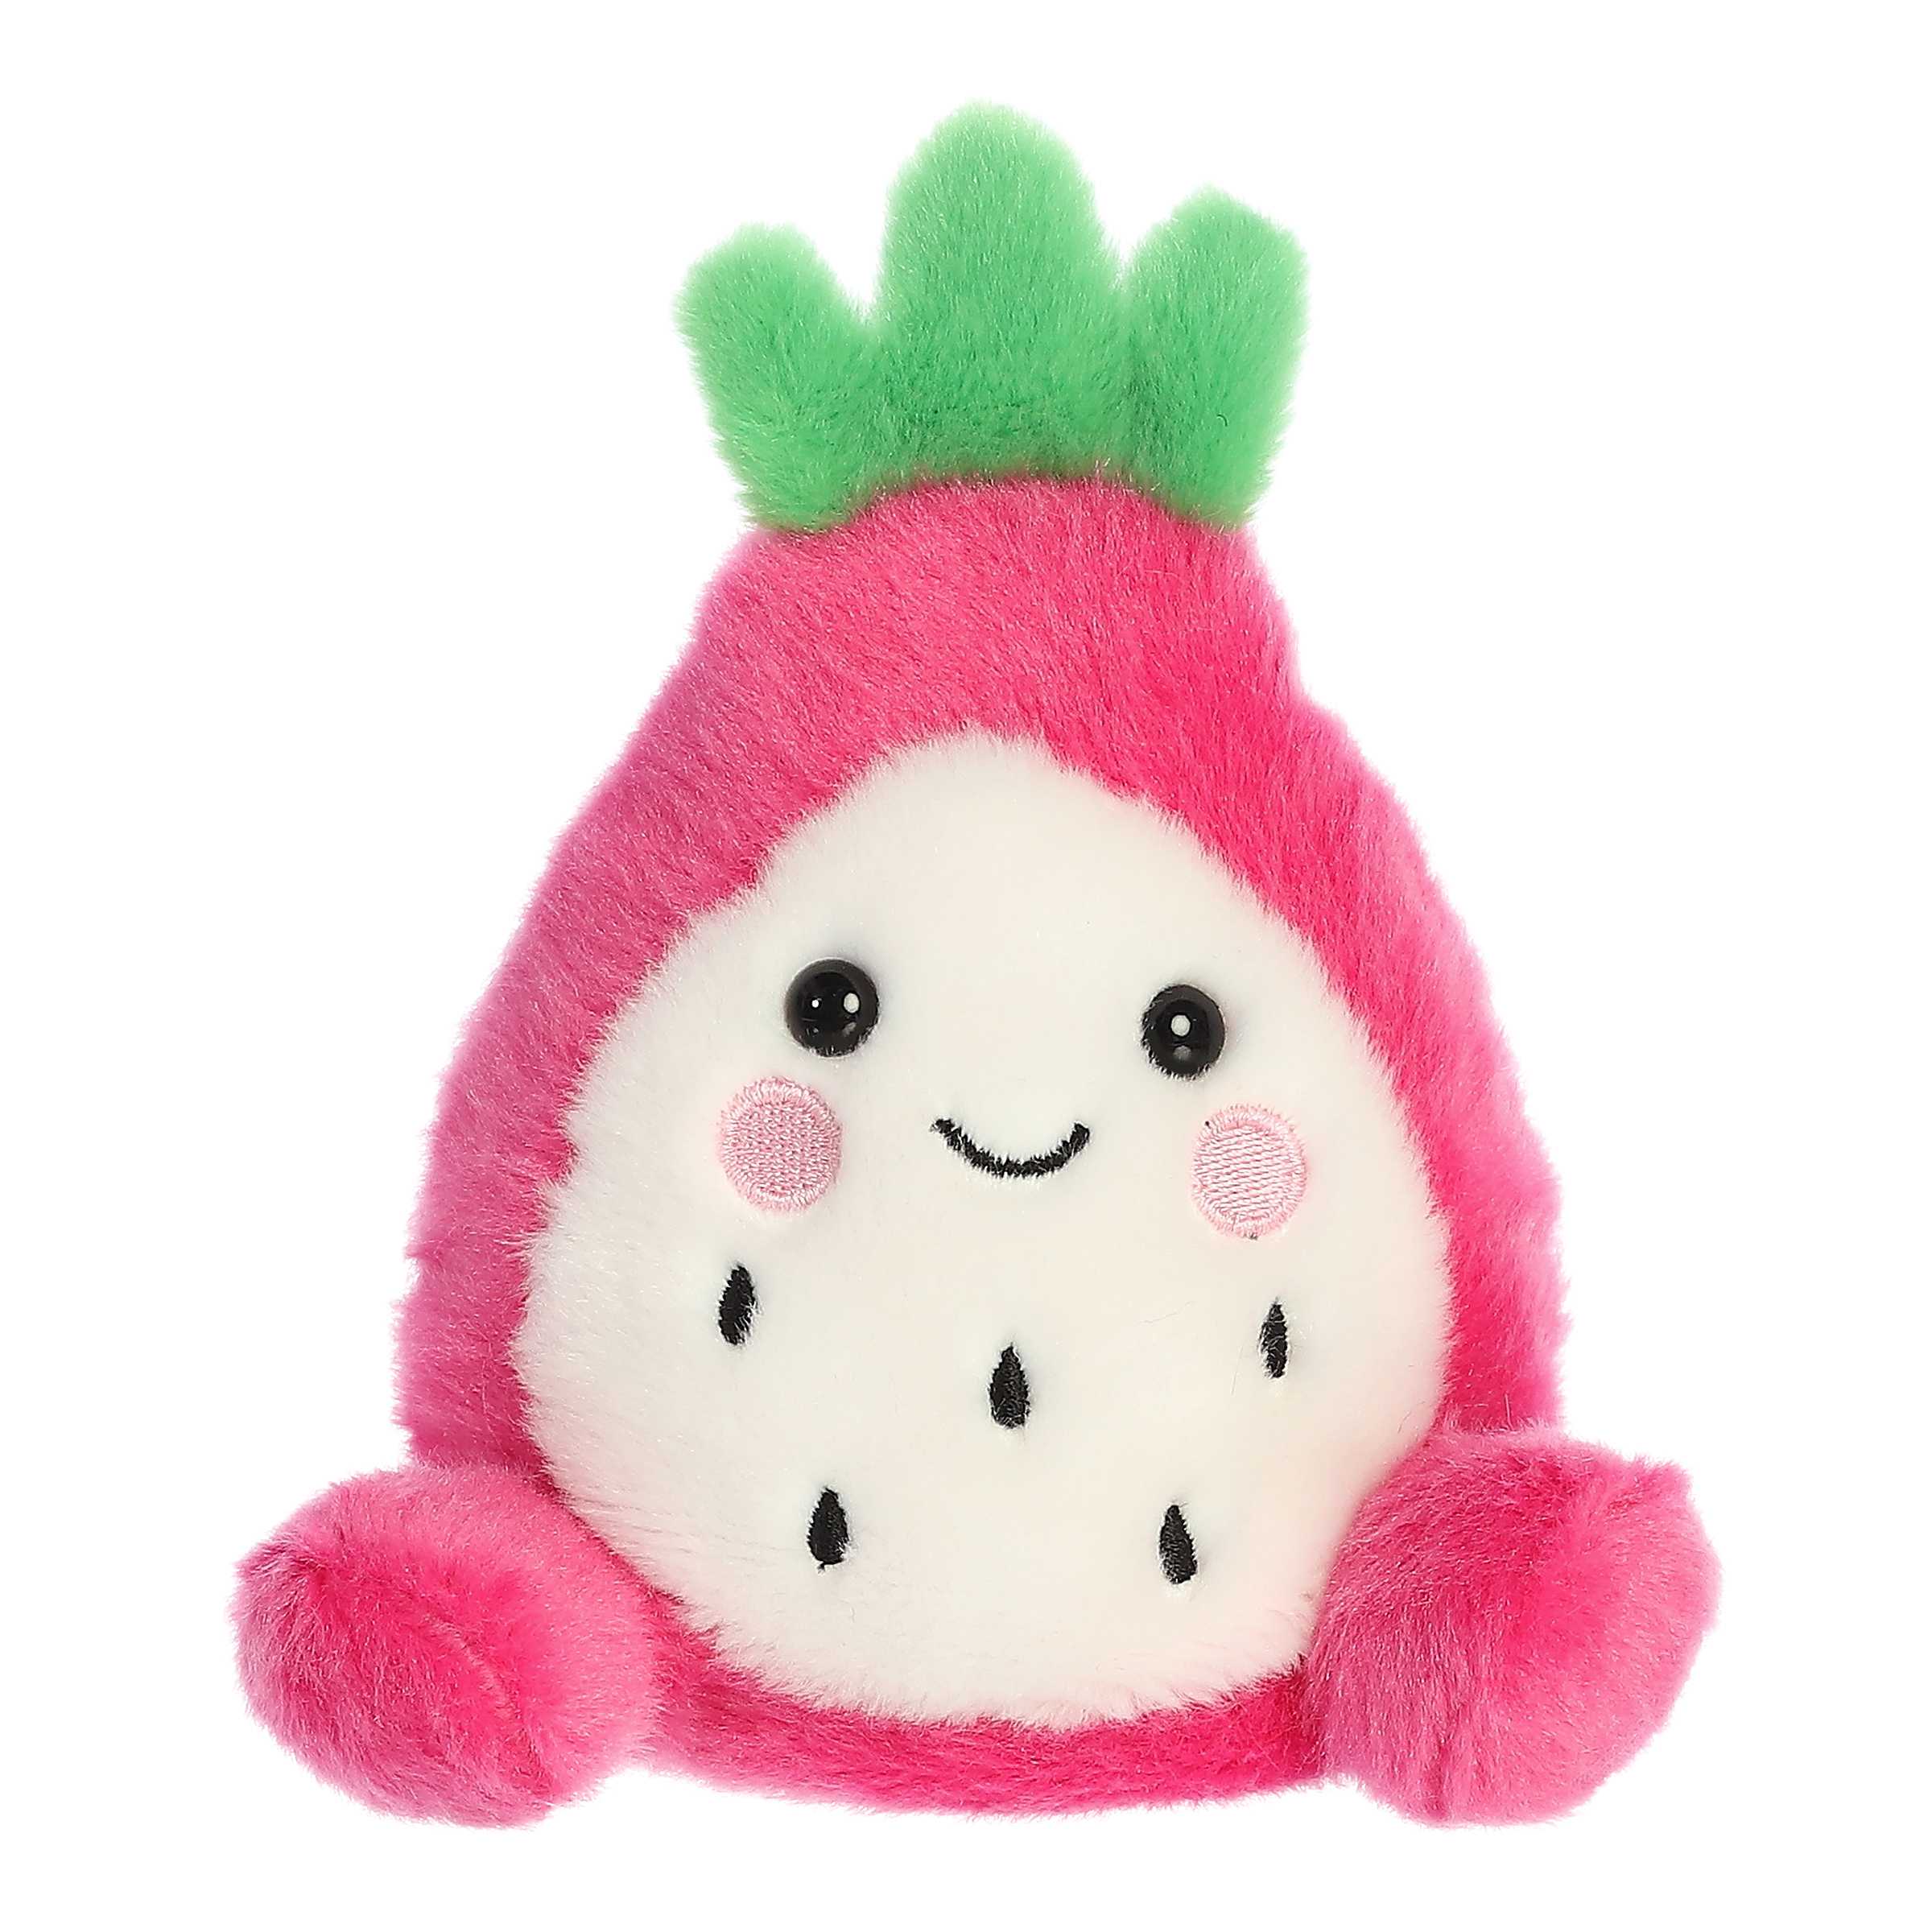 Rhys Dragonfruit is a vibrant plush with a striking pink and green crown, symbolizing the dragon fruit!